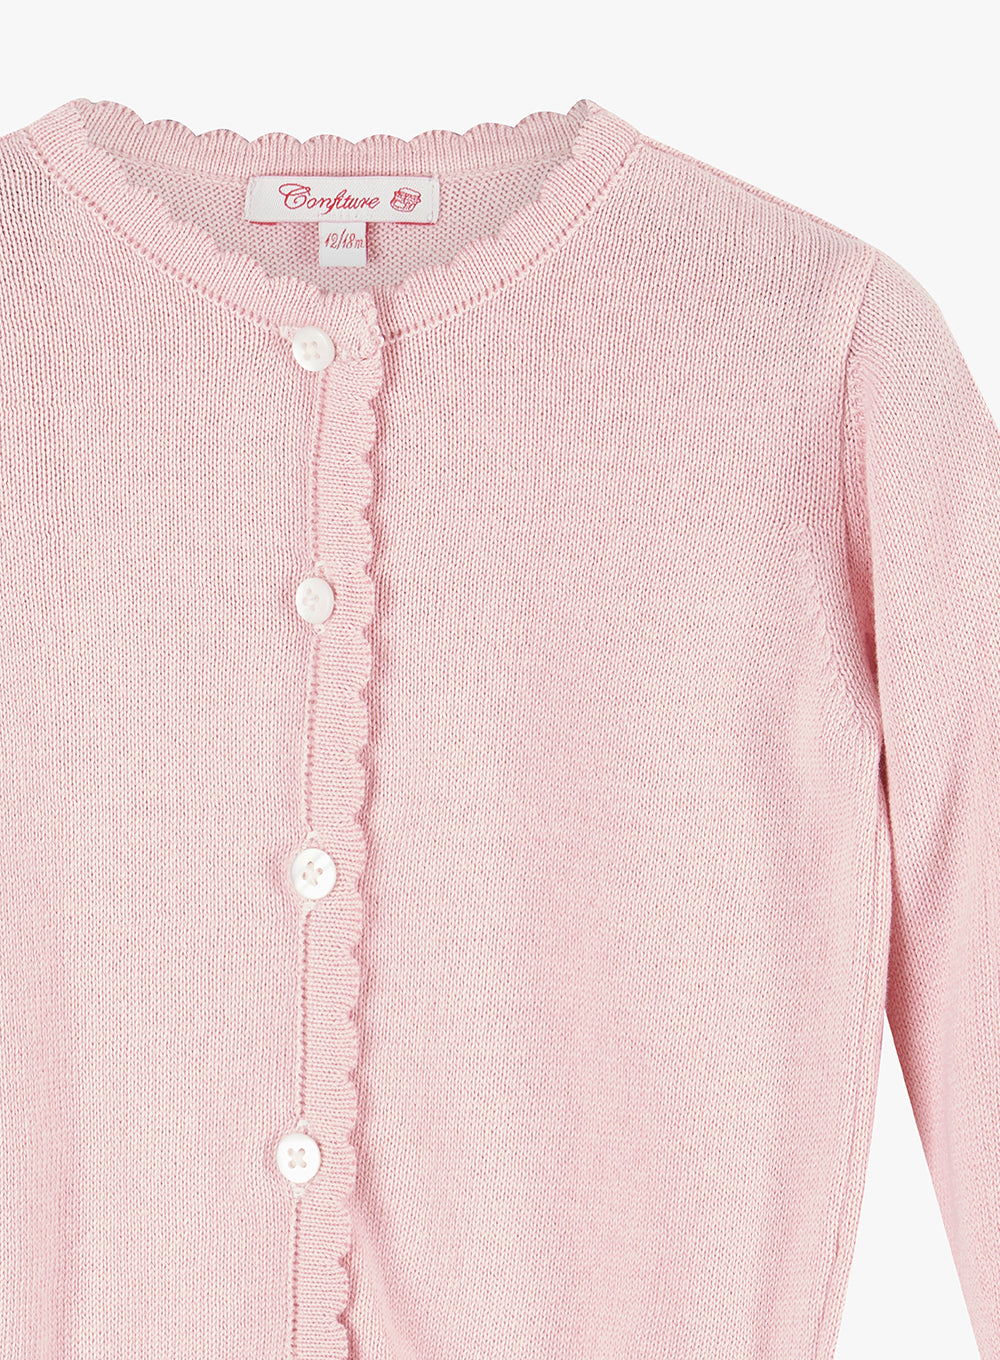 Little Pretty Scalloped Edge Cardigan in Pale Pink